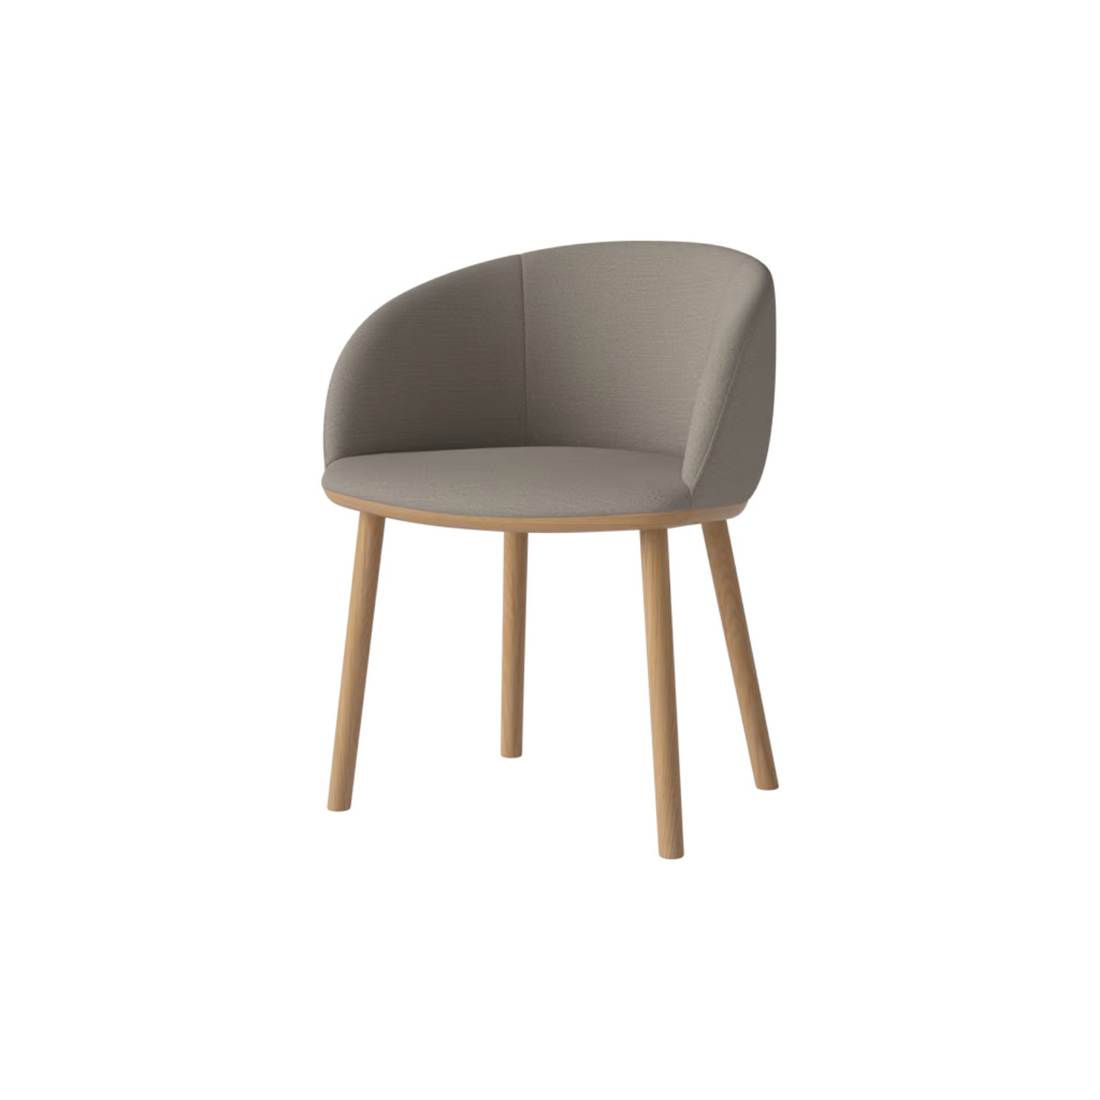 BOLIA Join Dining Chair Oiled Oak and Dark Beige